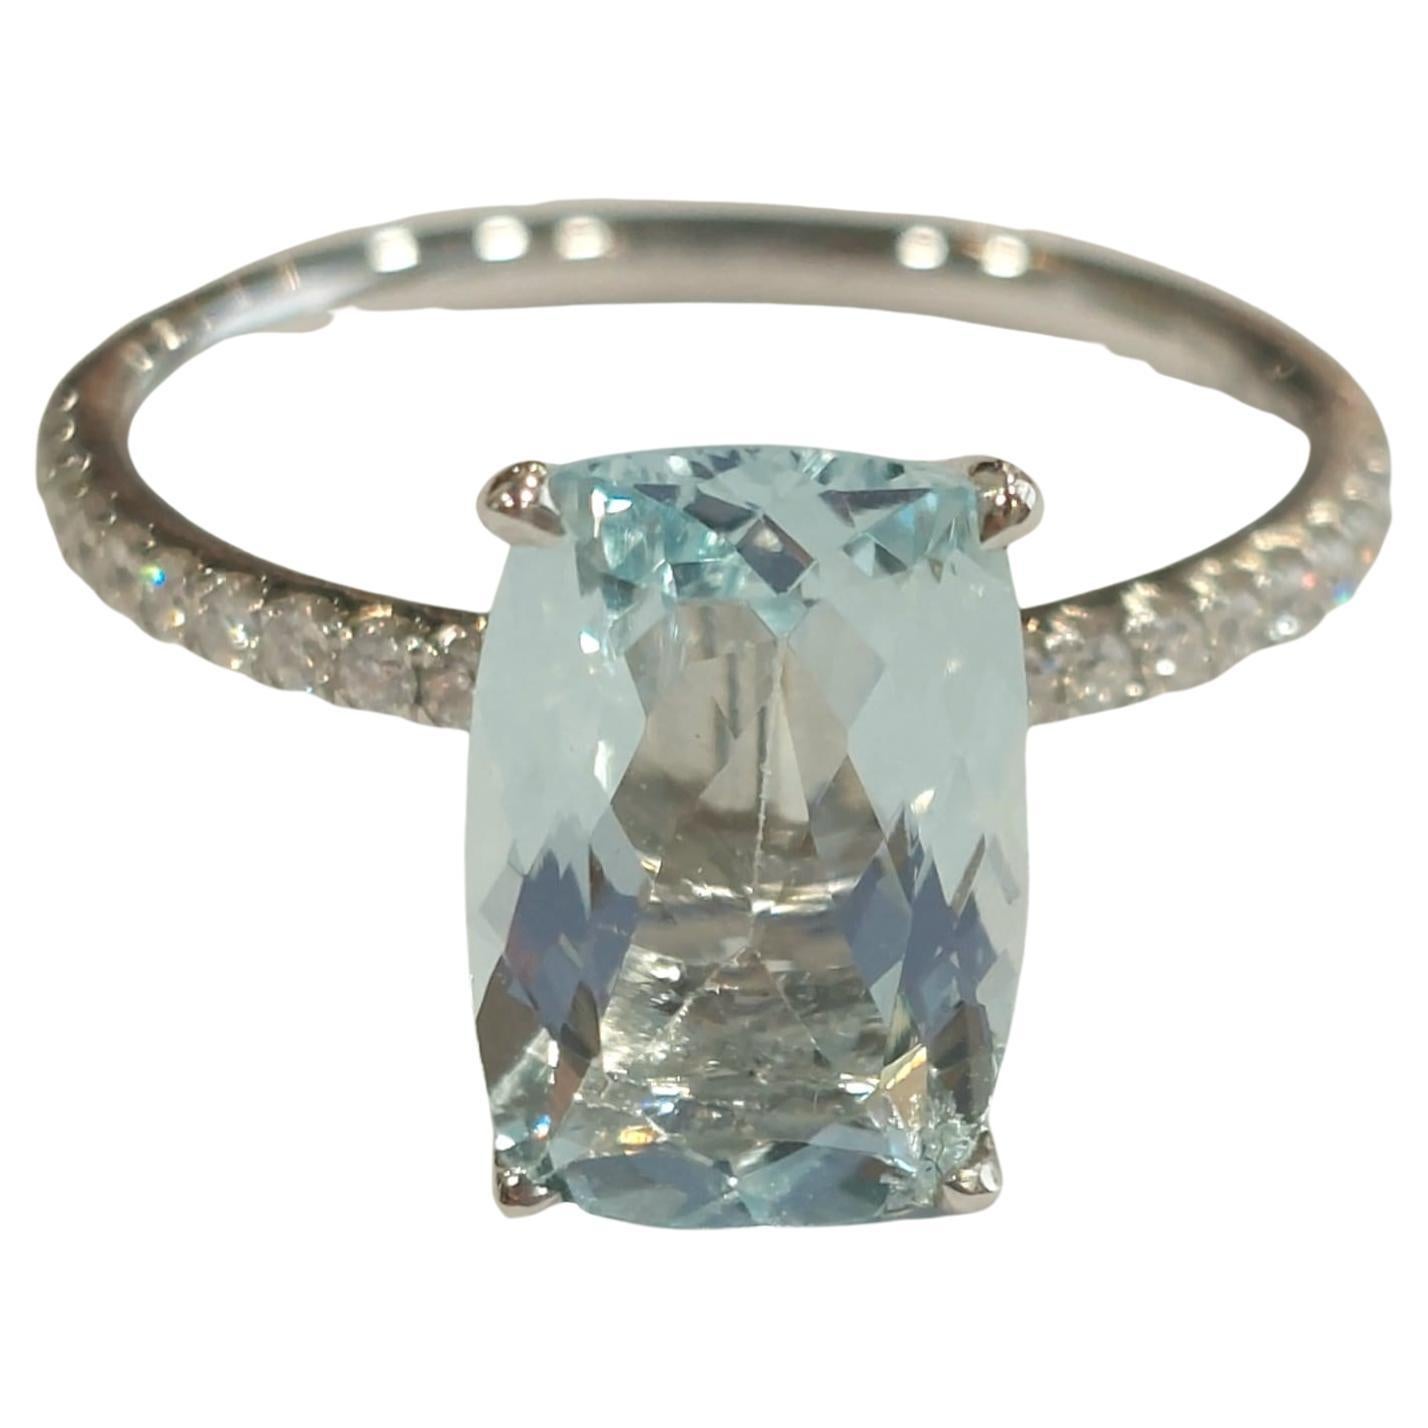 Gilin 18k White Gold Diamond Ring with Aquamarine For Sale